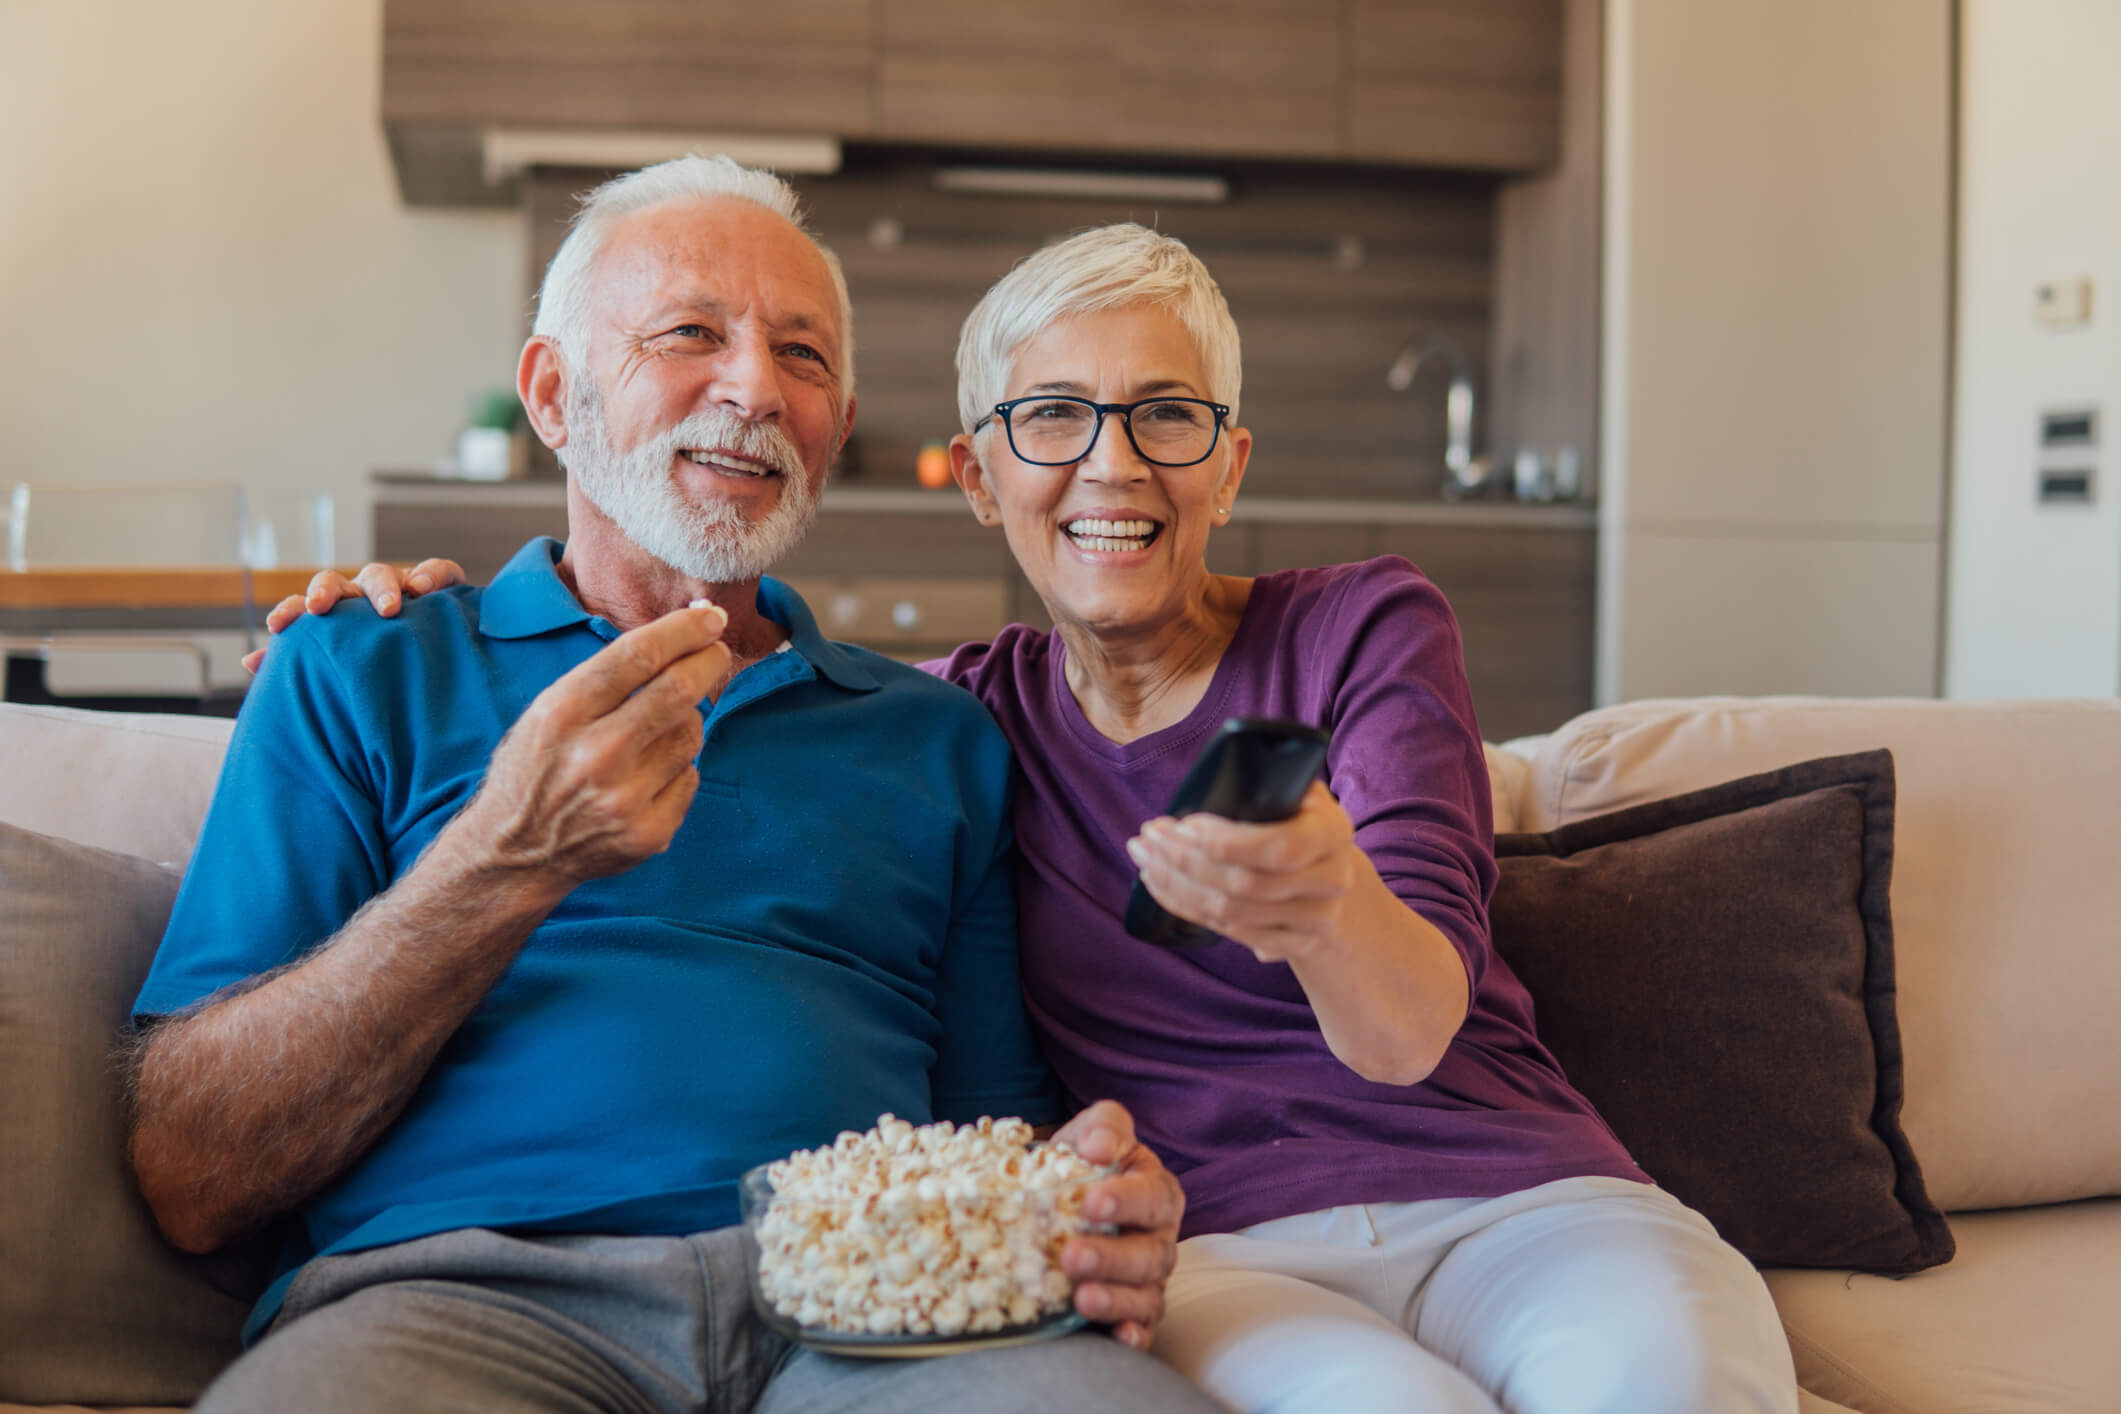 3 Reasons Your Senior Living Community Should Consider a New Video Provider